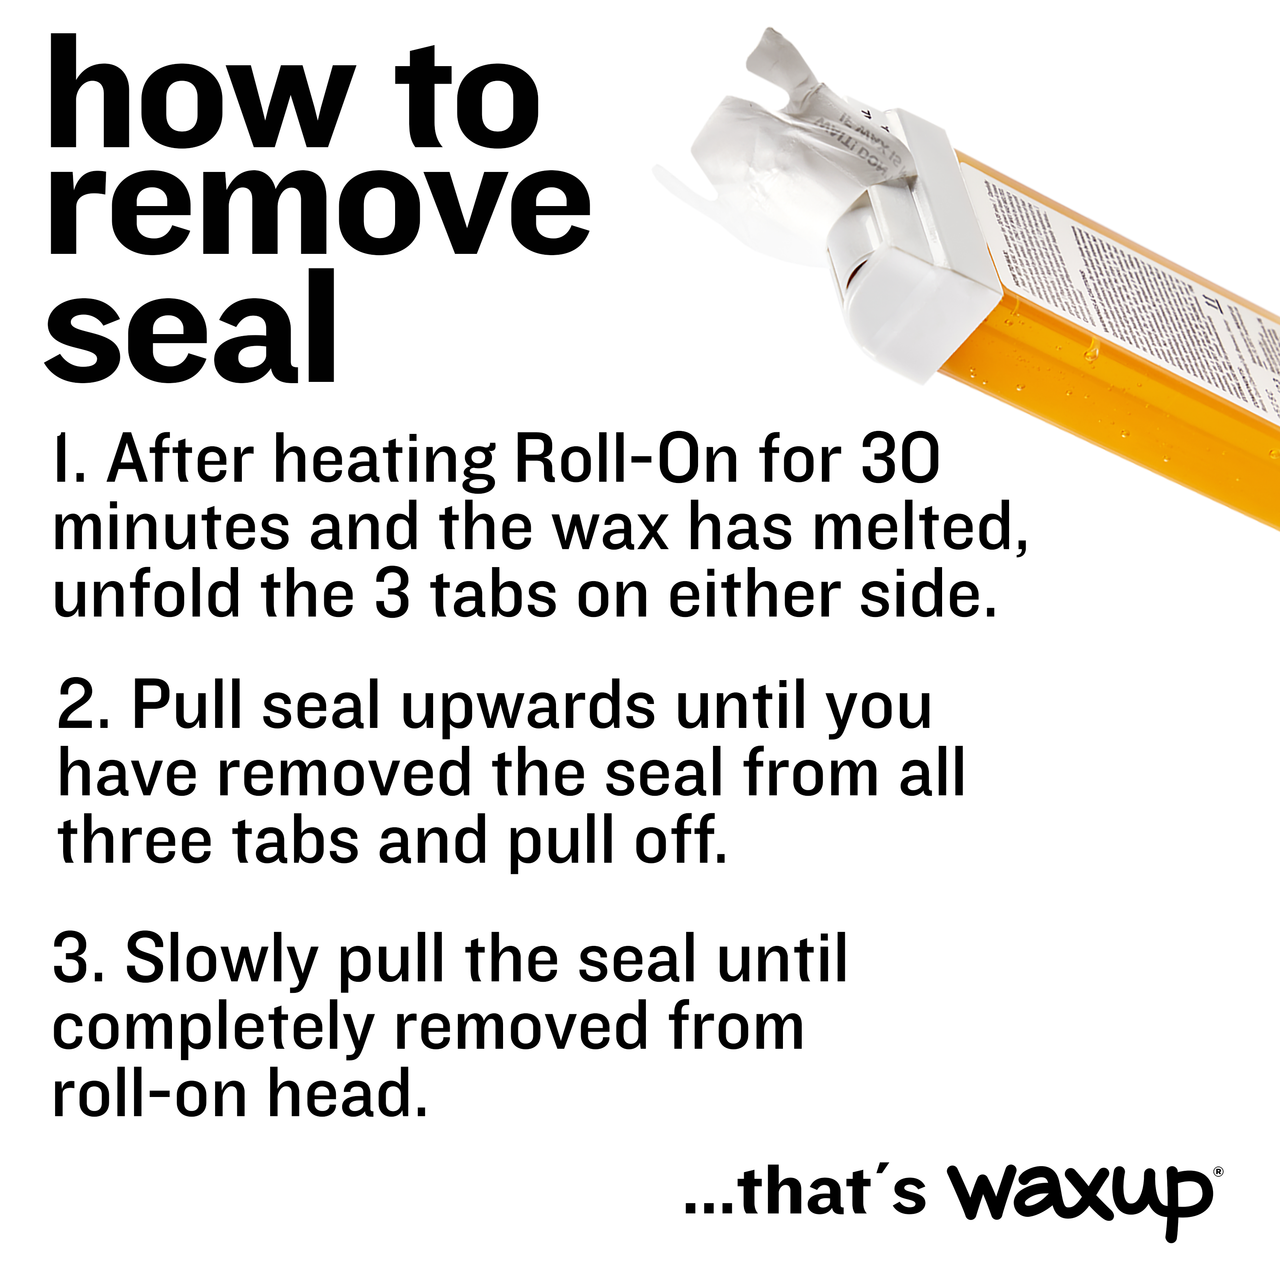 Honey Roller Waxing Kit Refill - thatswaxup -  - Roll On Wax - waxup hair removal wax body waxing kit women and men professional waxing supplies